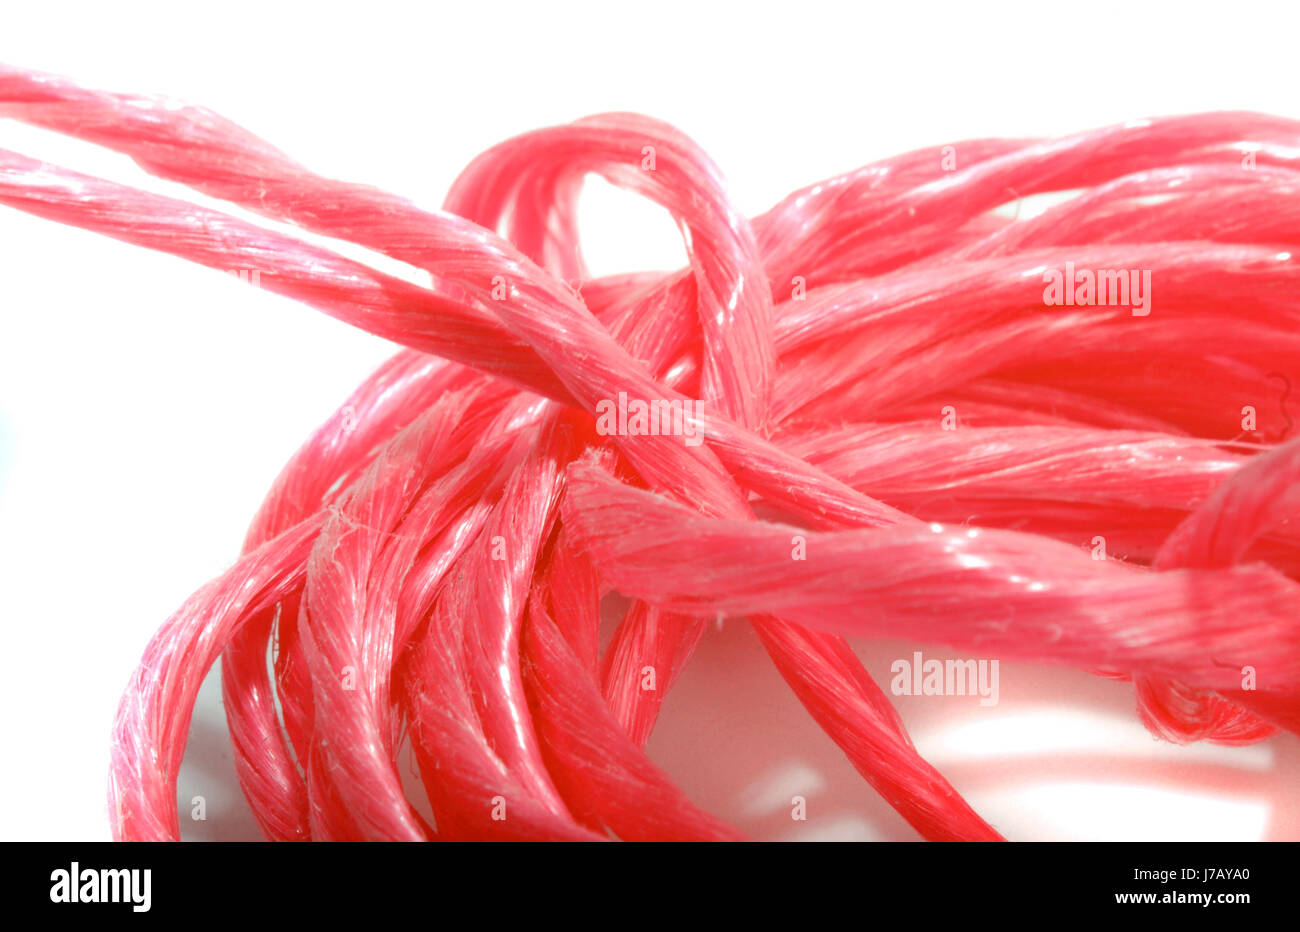 household dew cord unrolled red rope twine string blue macro close-up macro Stock Photo